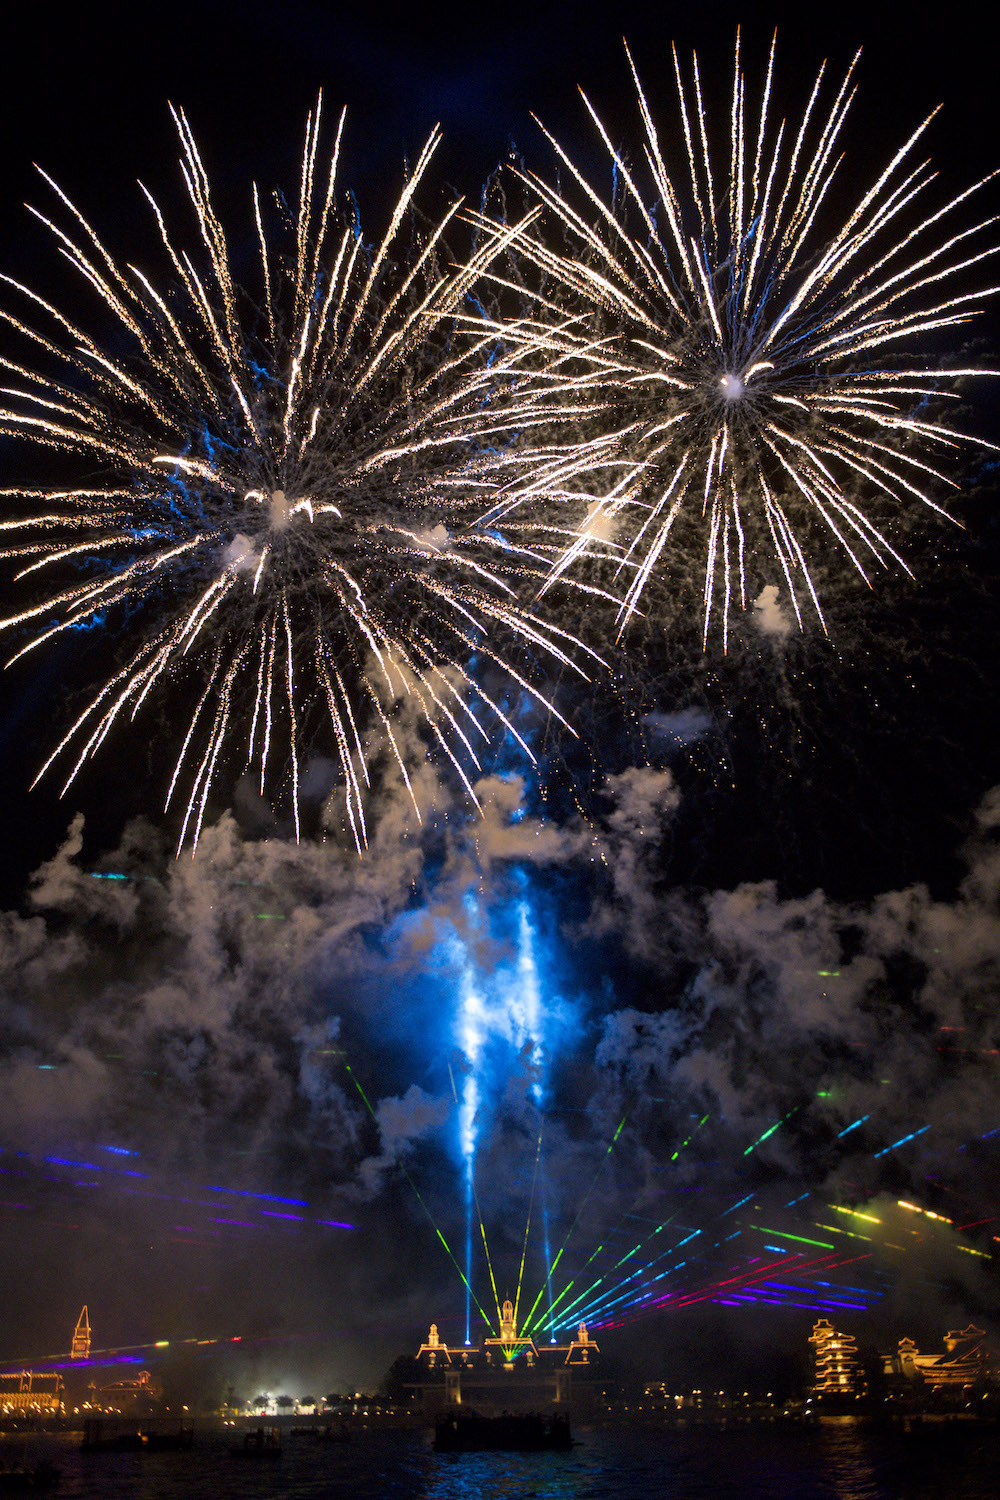 Epcot’s HarmonioUS nighttime spectacular will light up the sky | blooloop